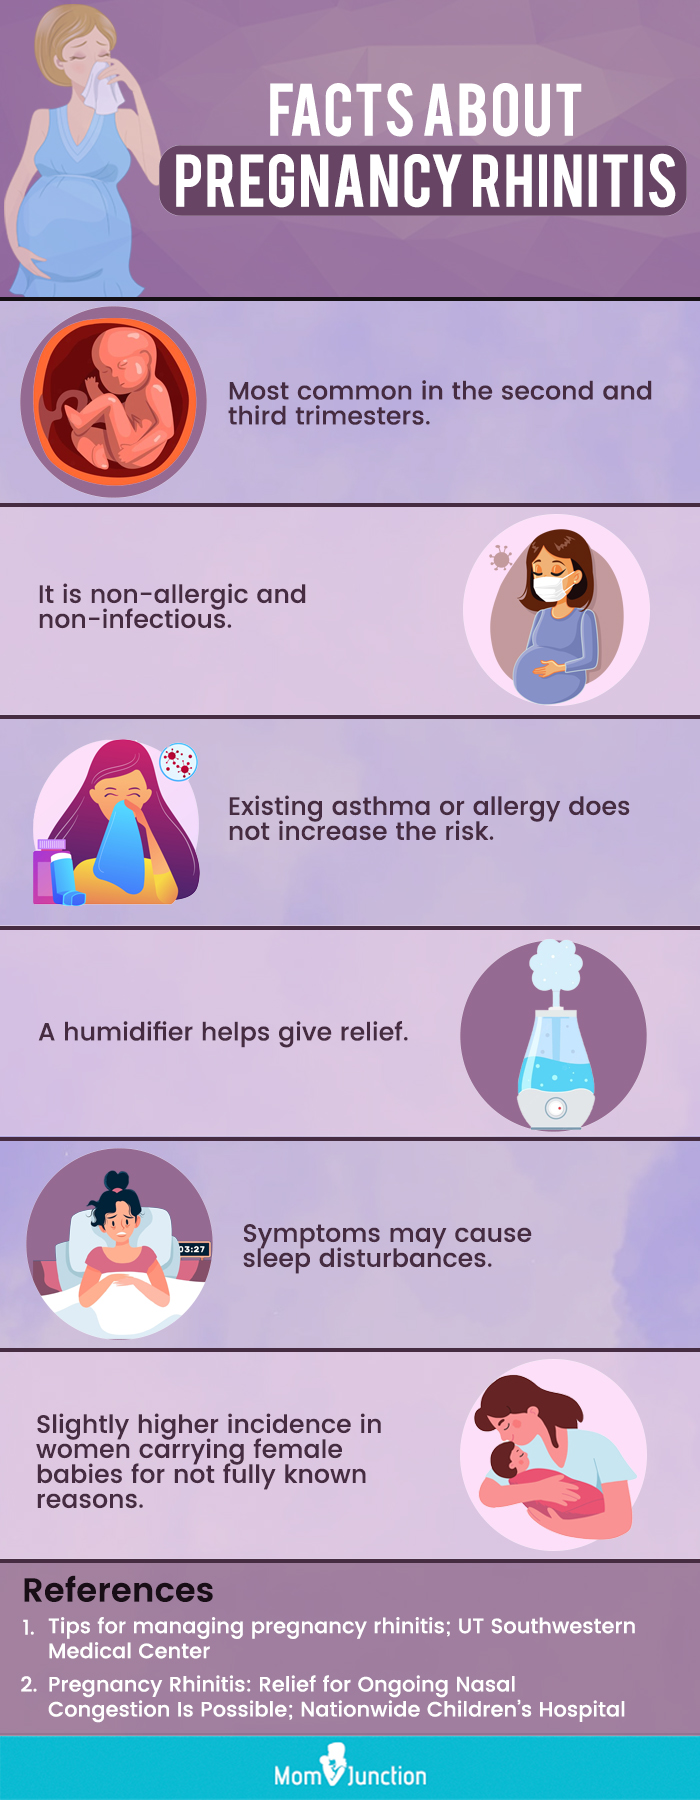 facts about pregnancy rhinitis (infographic)